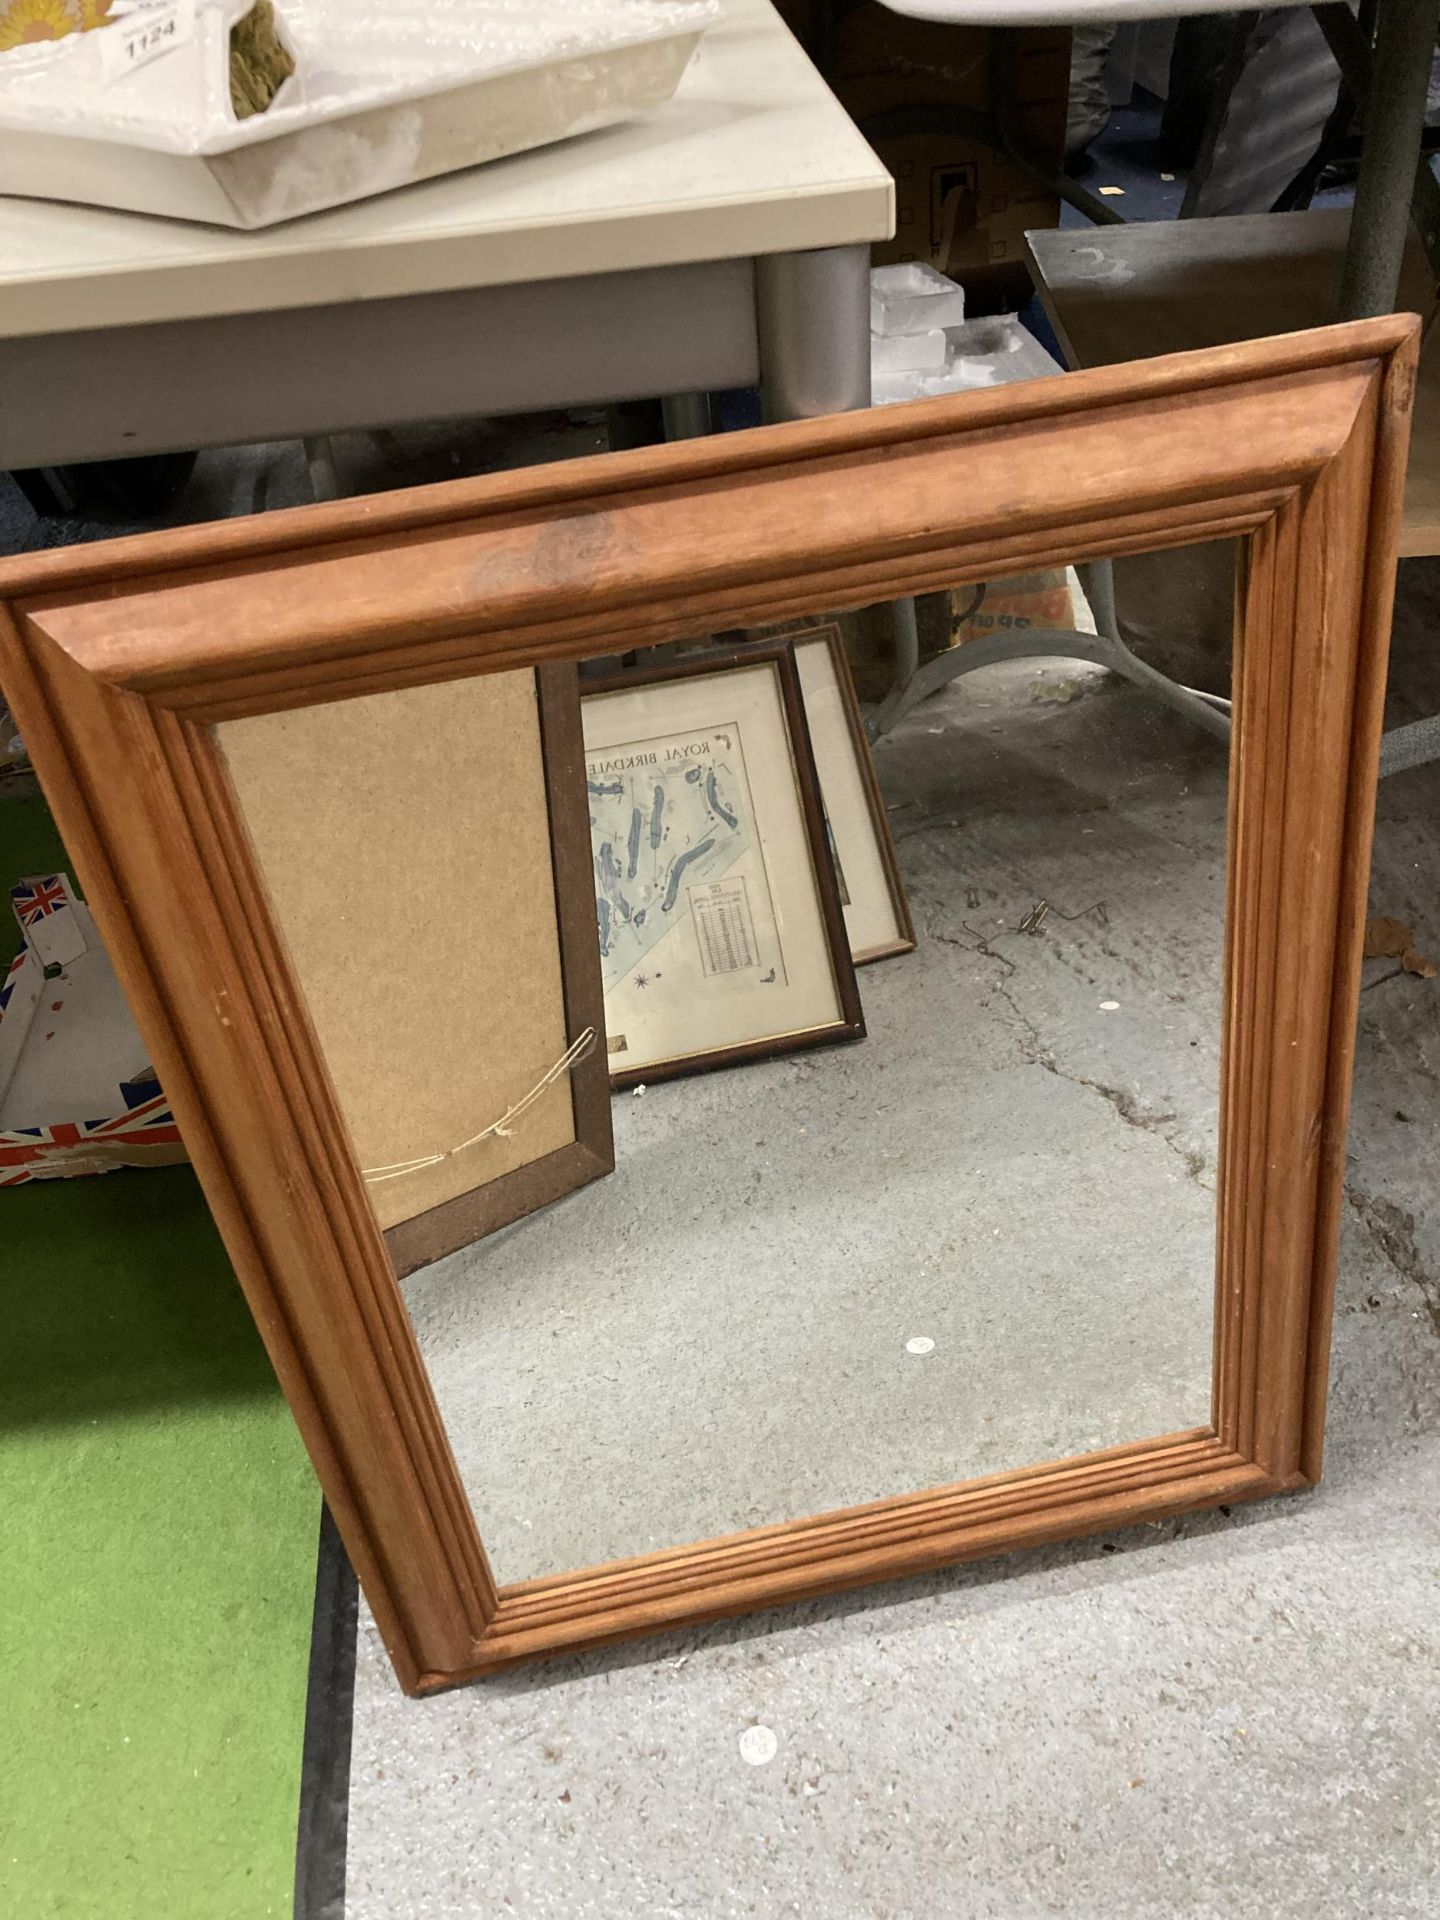 TWO WOODEN FRAMED MIRRORS - Image 3 of 3